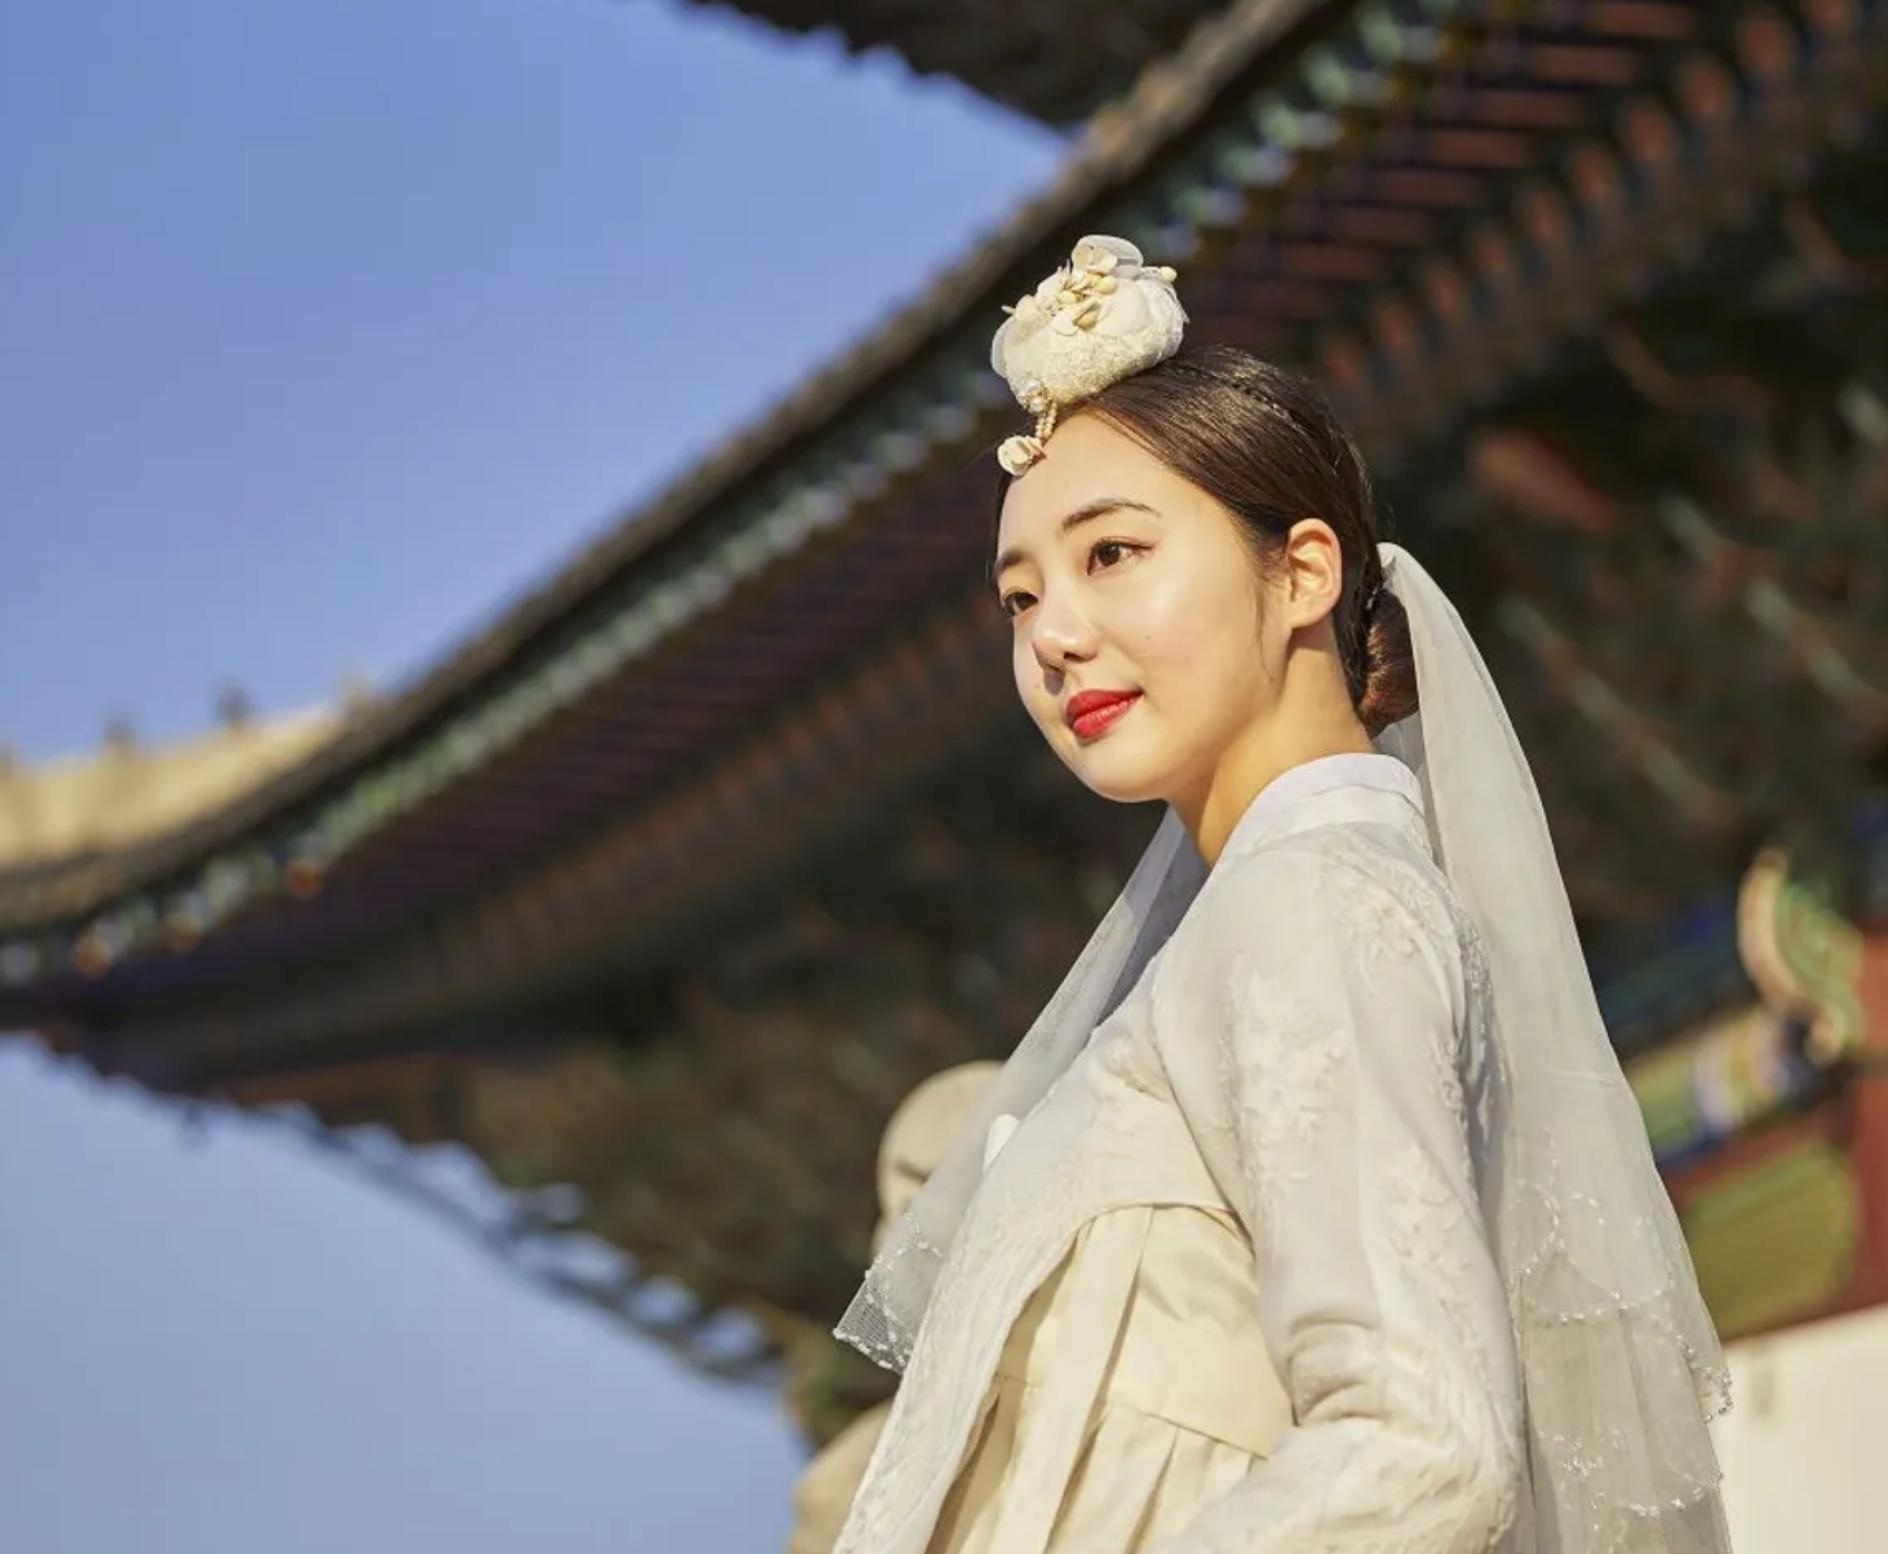 Happy woman wearing traditional Korean clothing, smiling against blue sky backdrop.